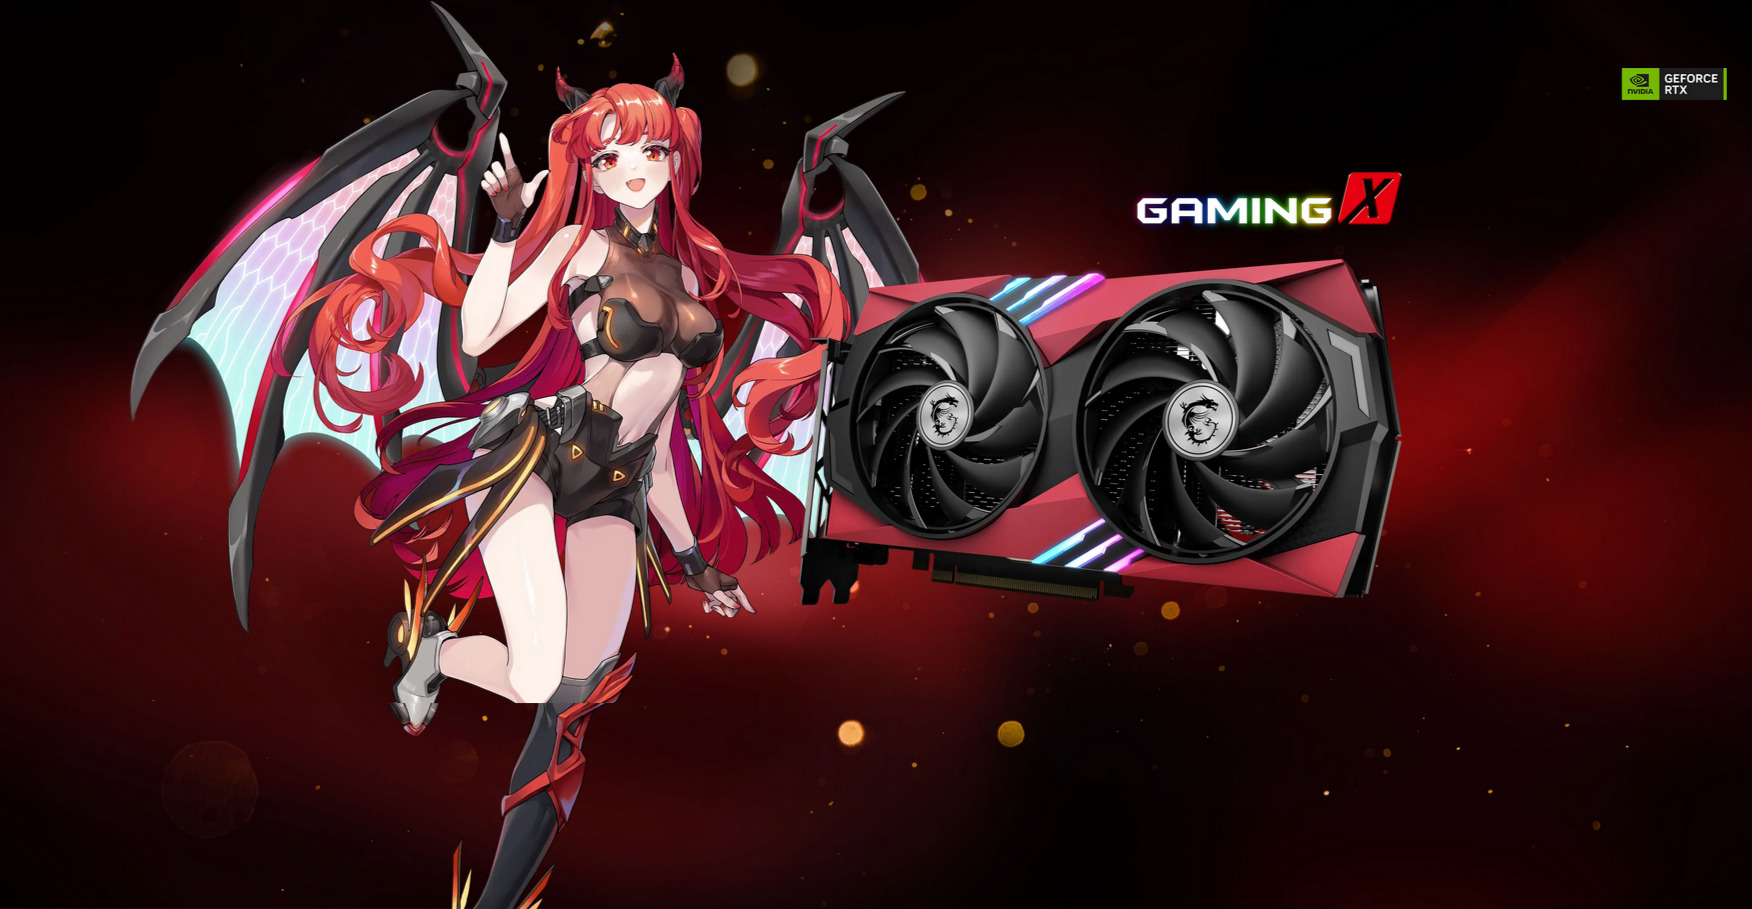 A large marketing image providing additional information about the product MSI GeForce RTX 4060 Gaming X MLG 8GB GDDR6 - Additional alt info not provided